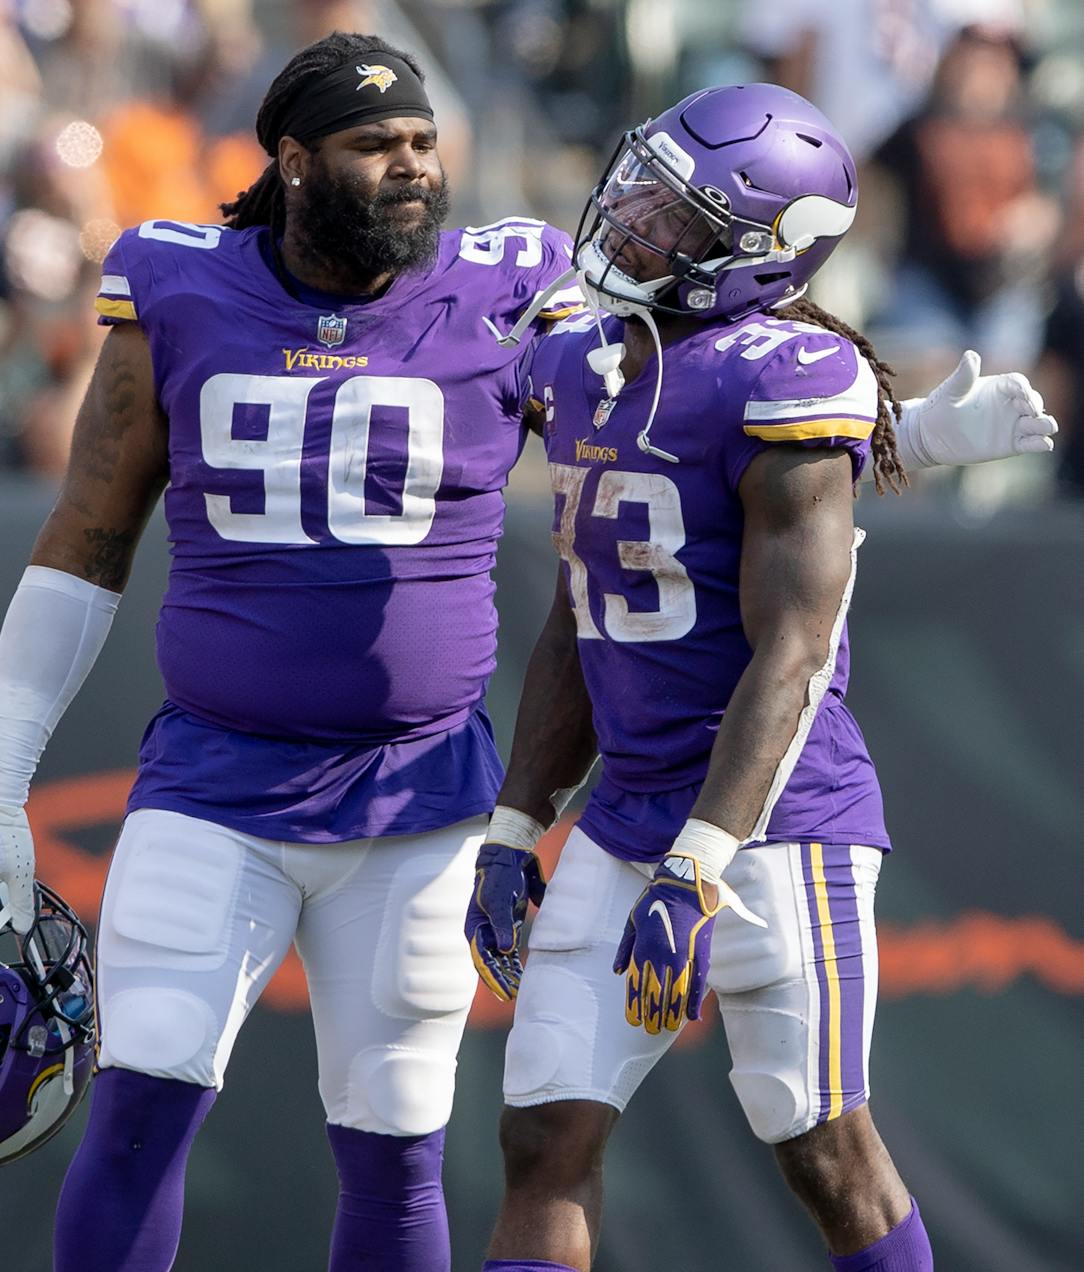 Vikings lose to Bengals 27-24 in overtime in mistake-filled season